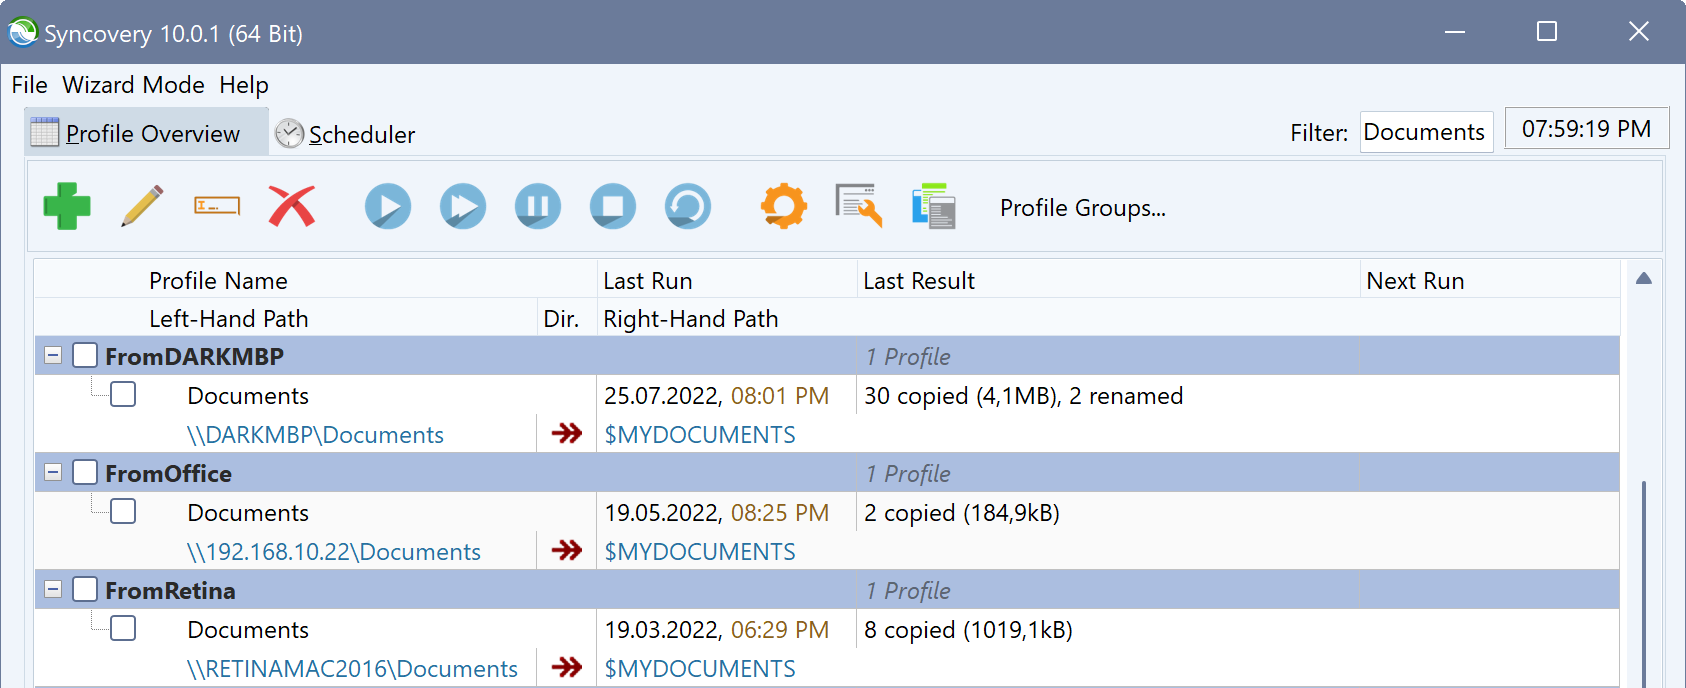 Screenshot of the Syncovery Profile Overview, allowing the user to edit and start sync jobs